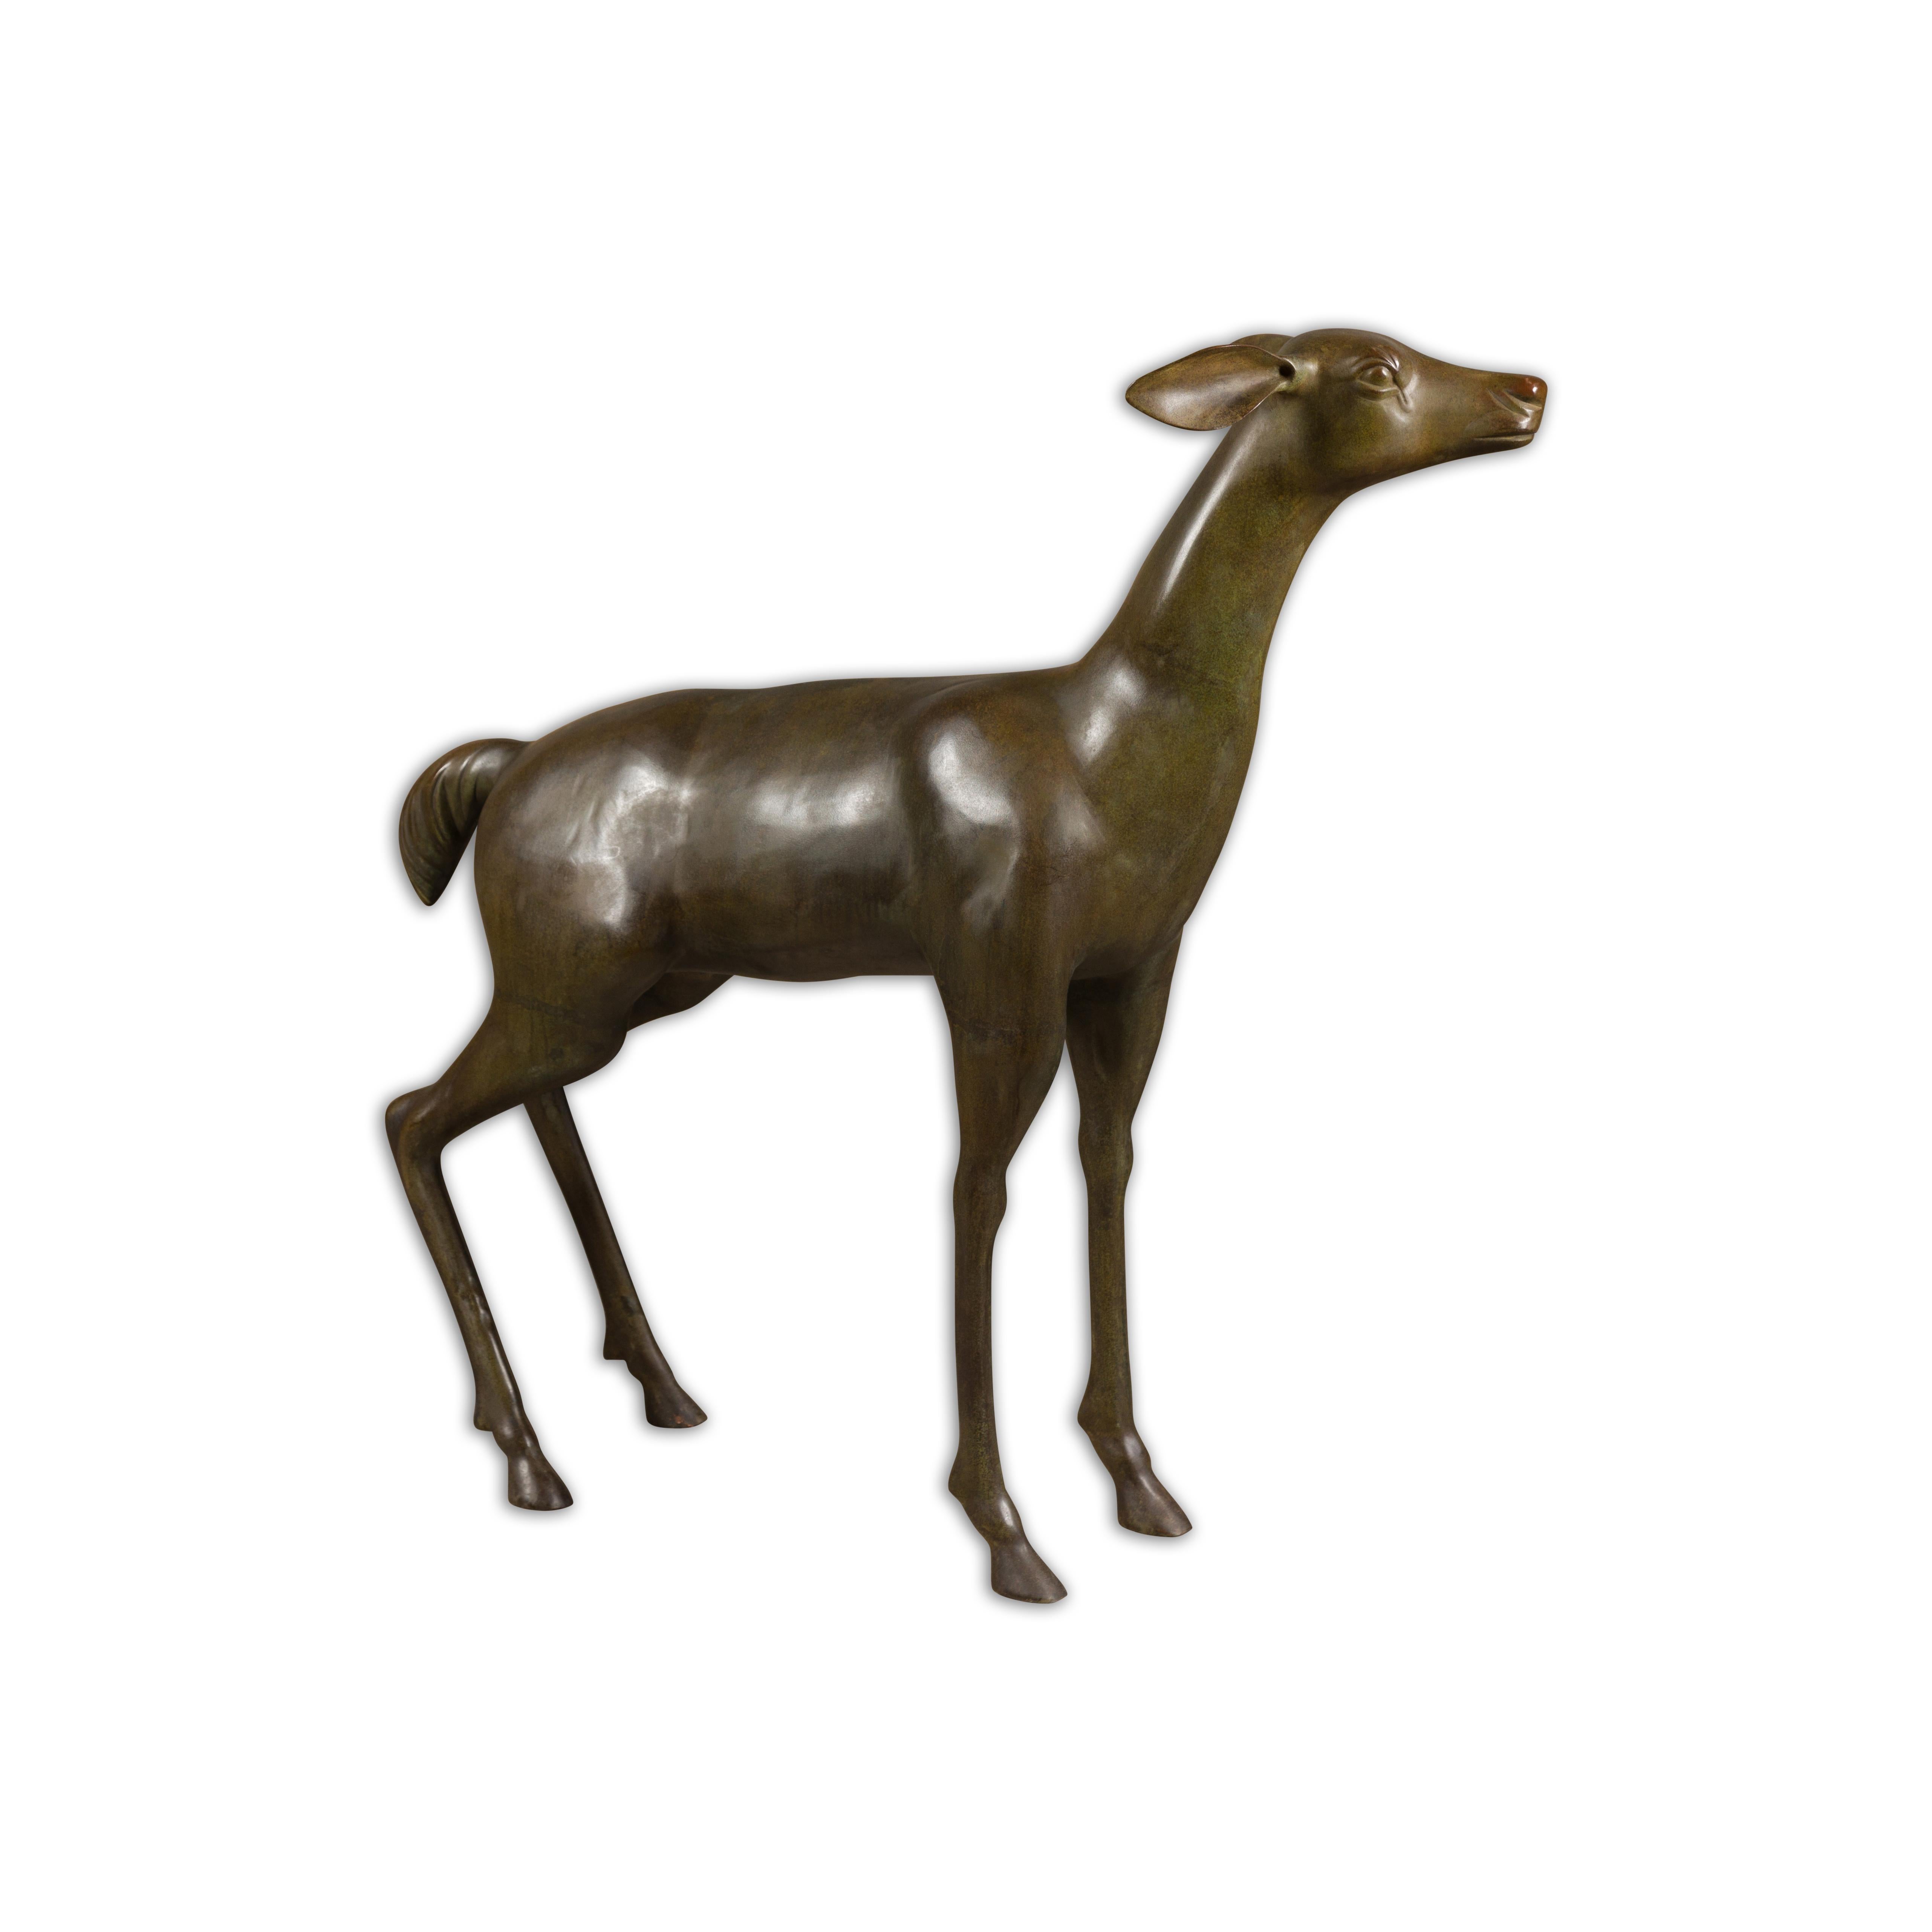 A Continental life size bronze sculpture depicting a deer, circa 1930. Elevate your outdoor space with the captivating beauty of this Continental life-size bronze sculpture from the 1930s, depicting a majestic deer in all its glory. This sculpture